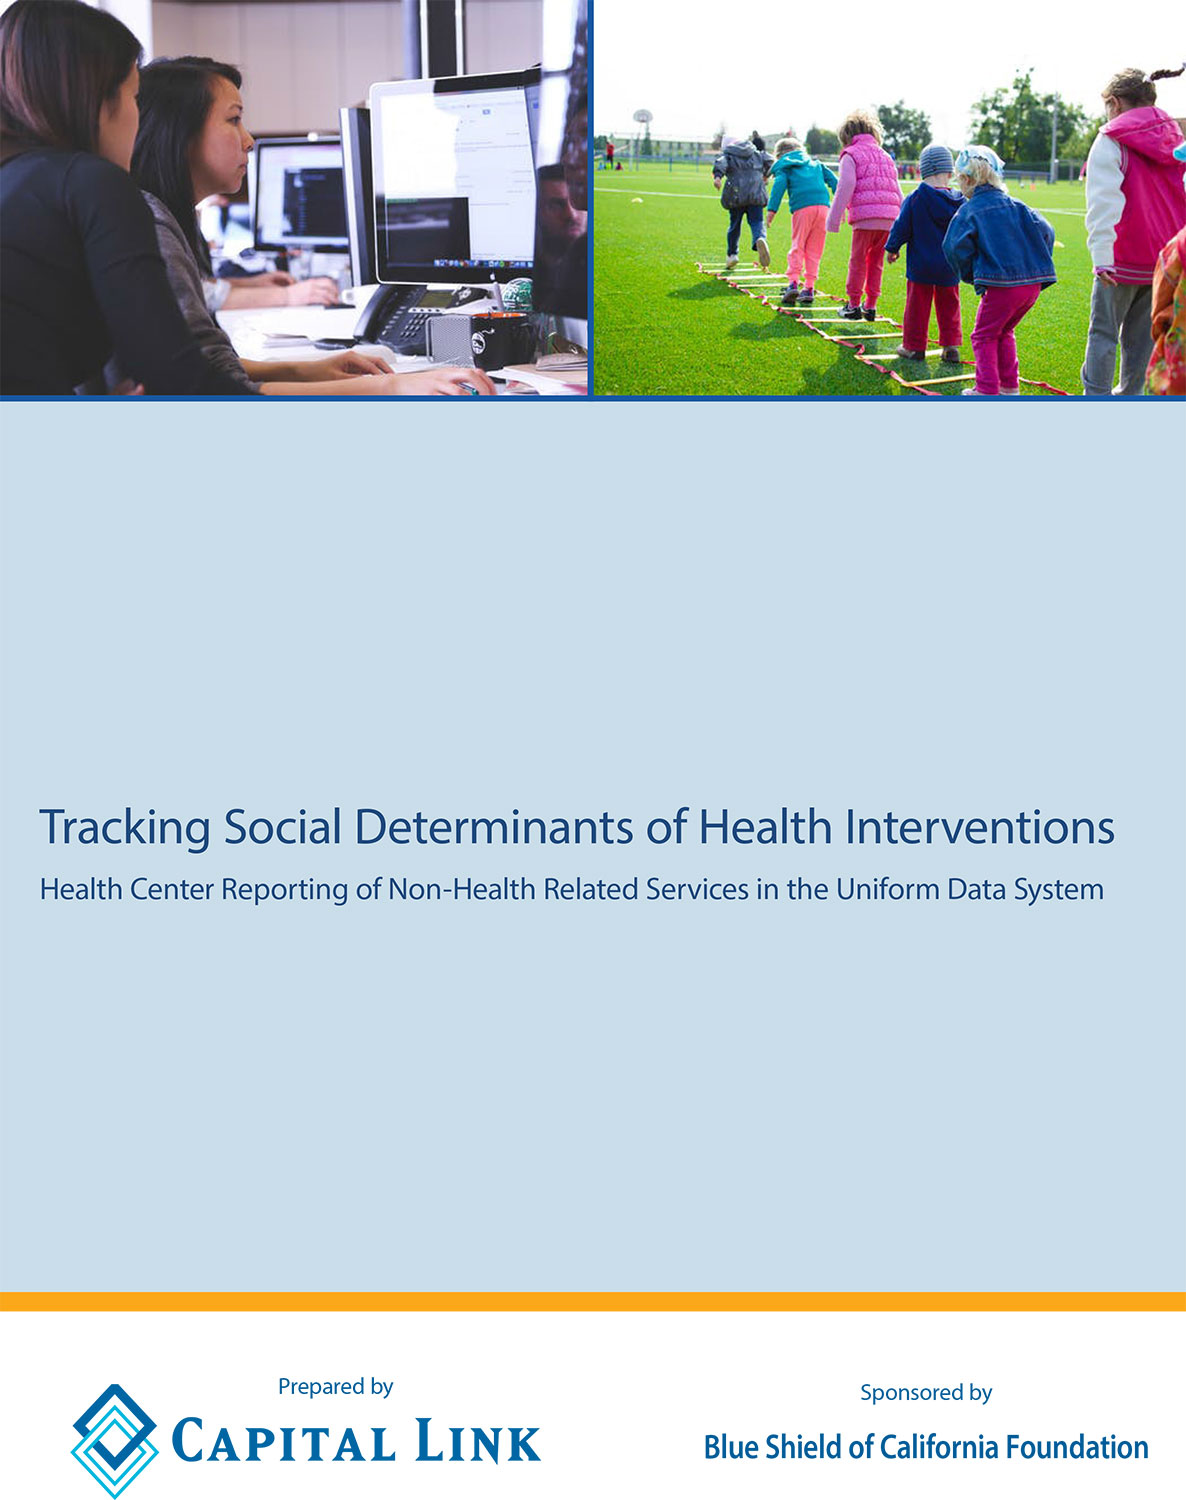 Analysis of Tracking SDOH Interventions in UDS 2 21 18 COVER